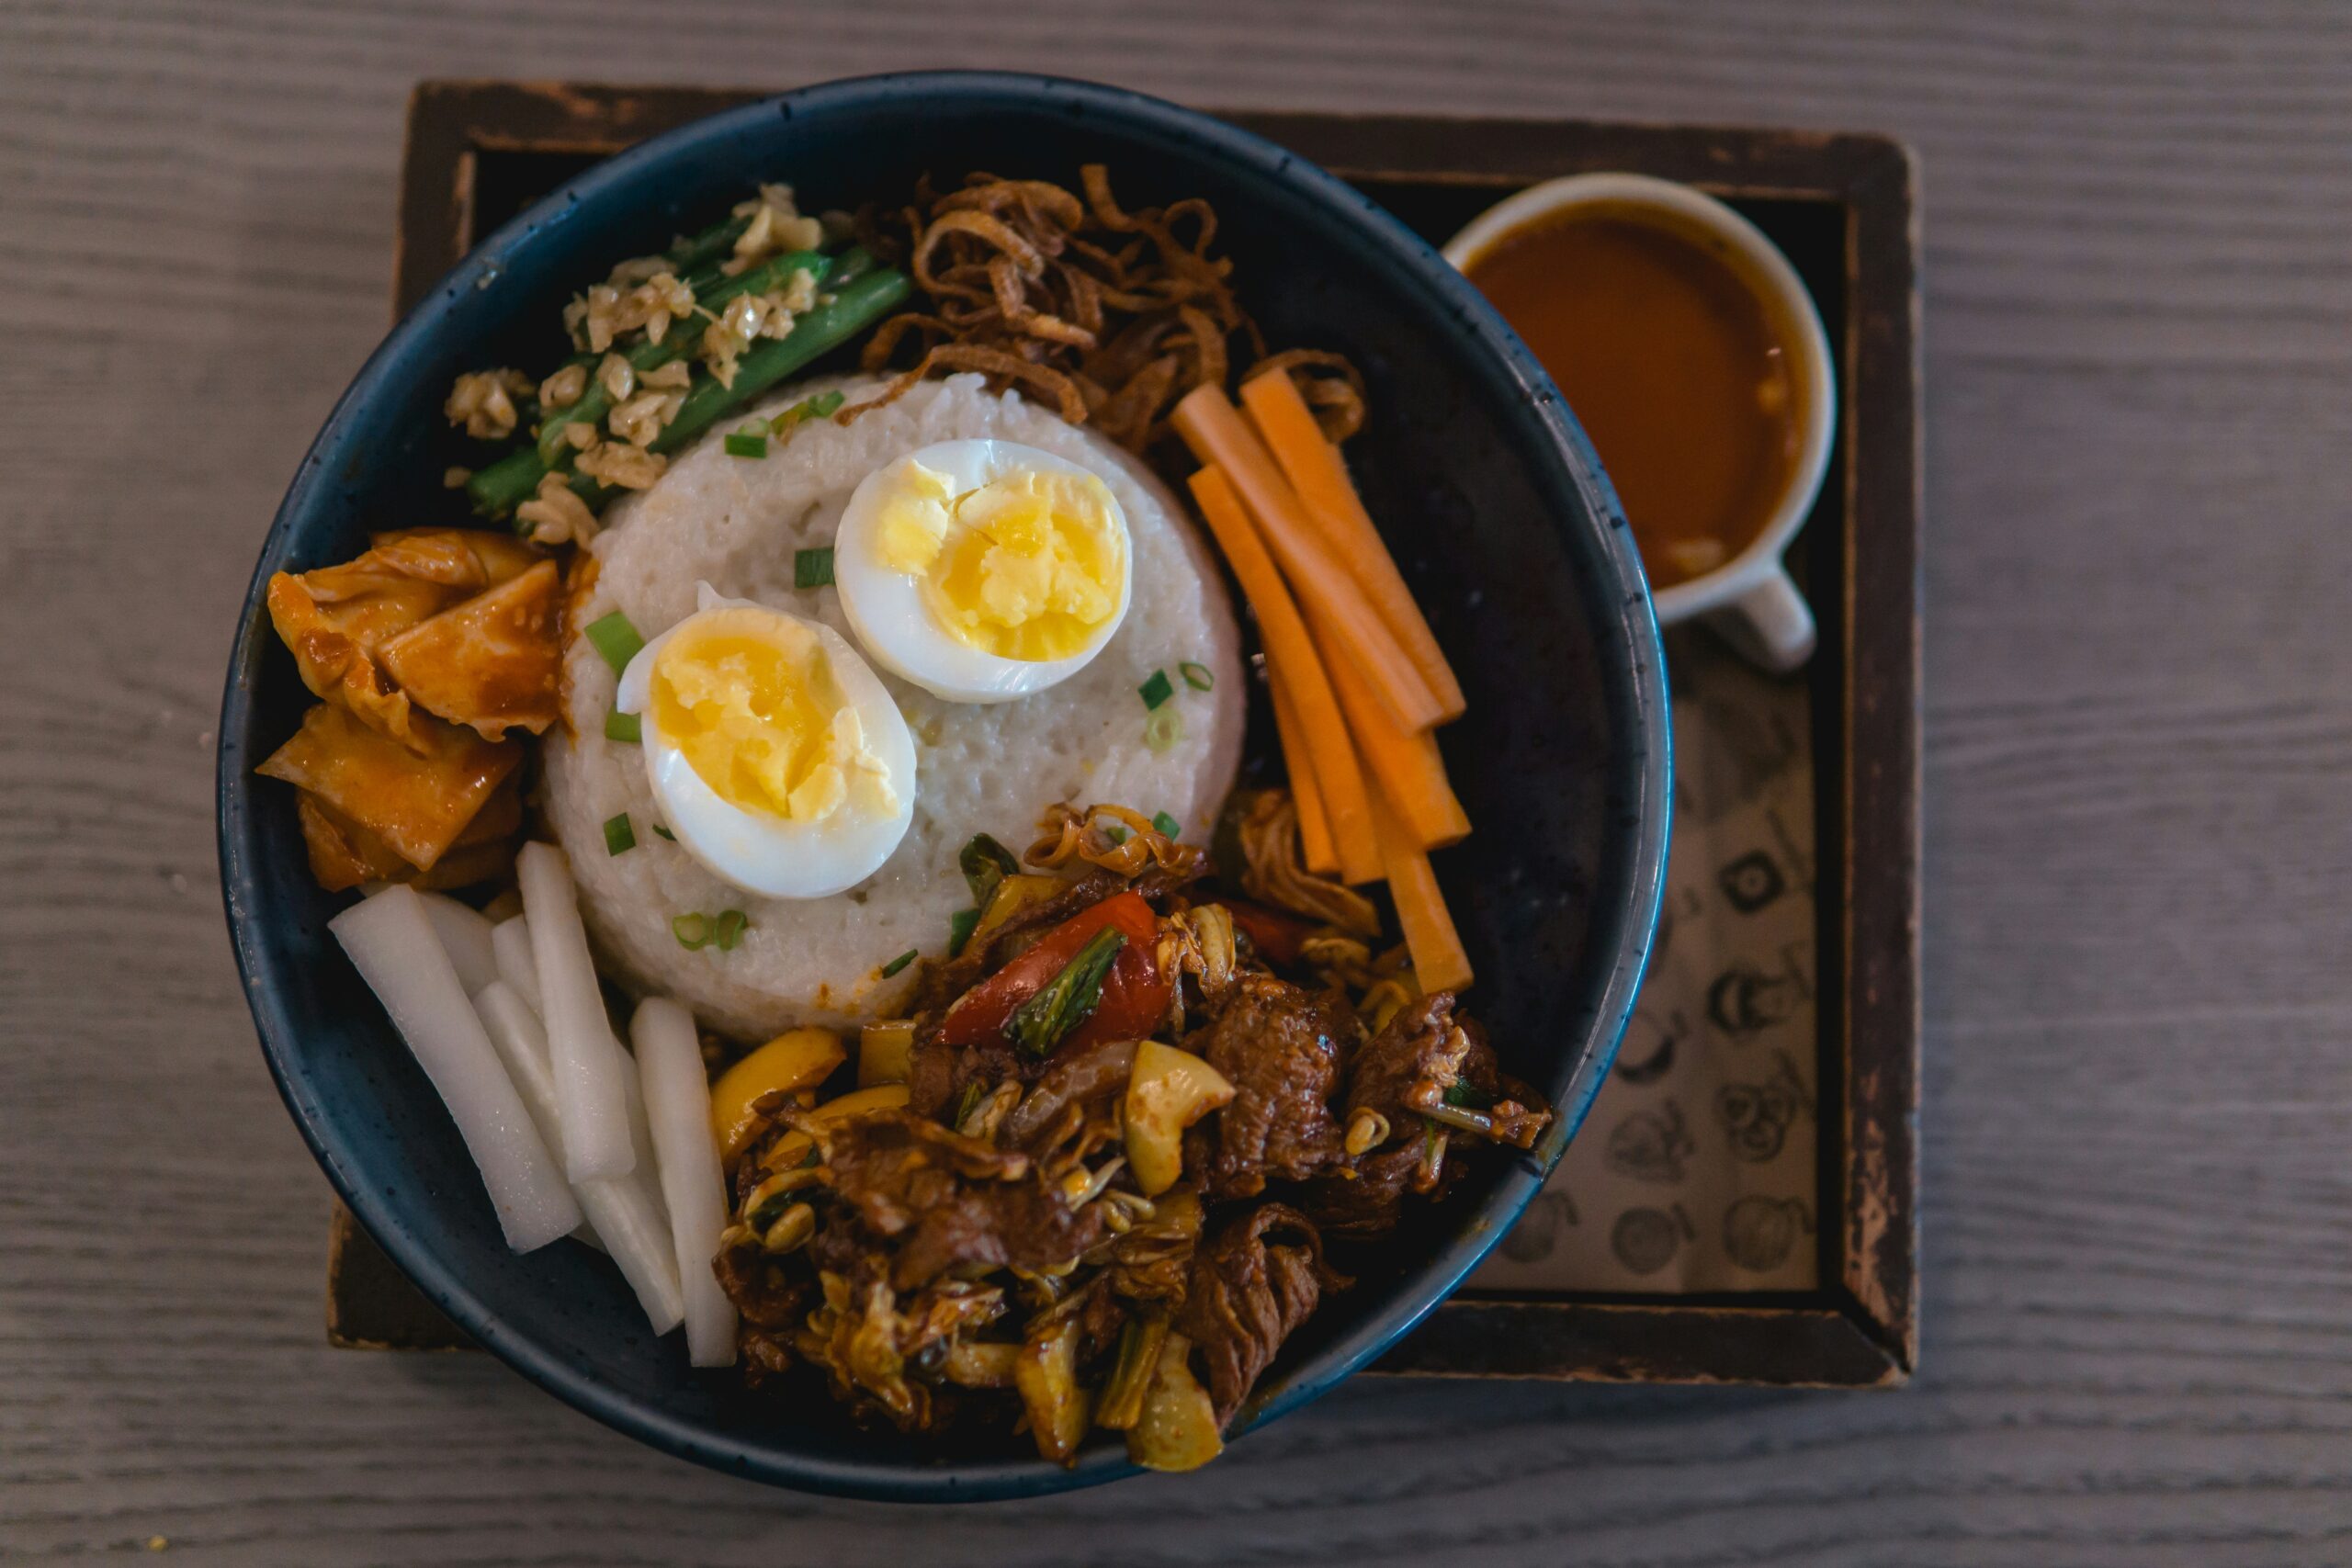 Beef bibimbap with a boiled egg and kimchi in a blue bowl on a tray with a cup of tea